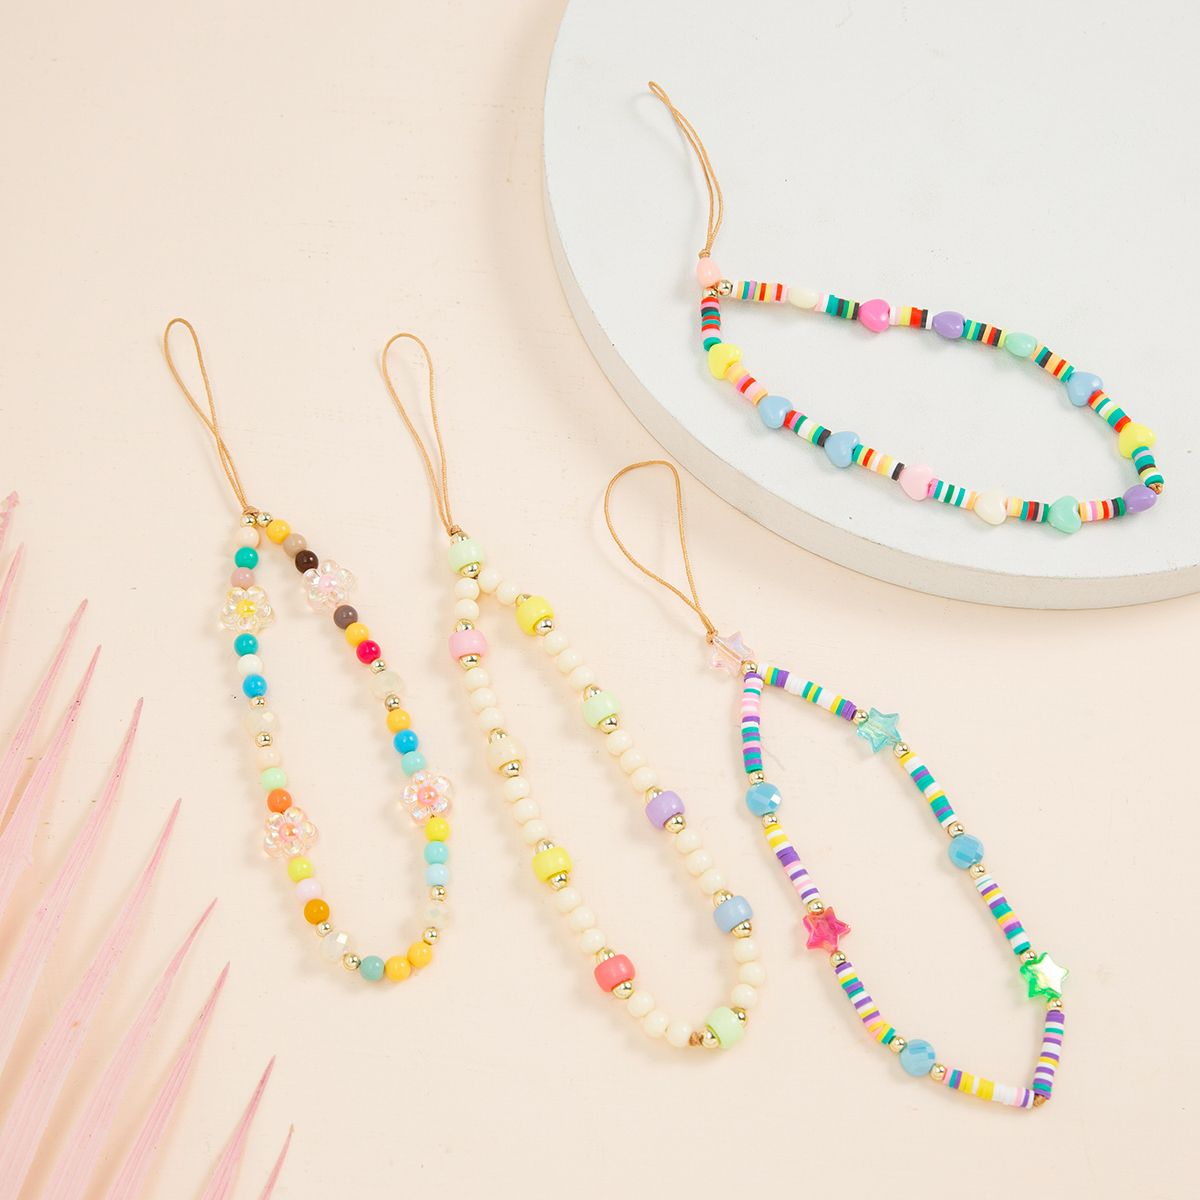 PUPU New Women Colorful Anti-Lost Soft Pottery Rope Mobile Phone Strap Lanyard Phone Chain Cell Phone Case Hanging Cord